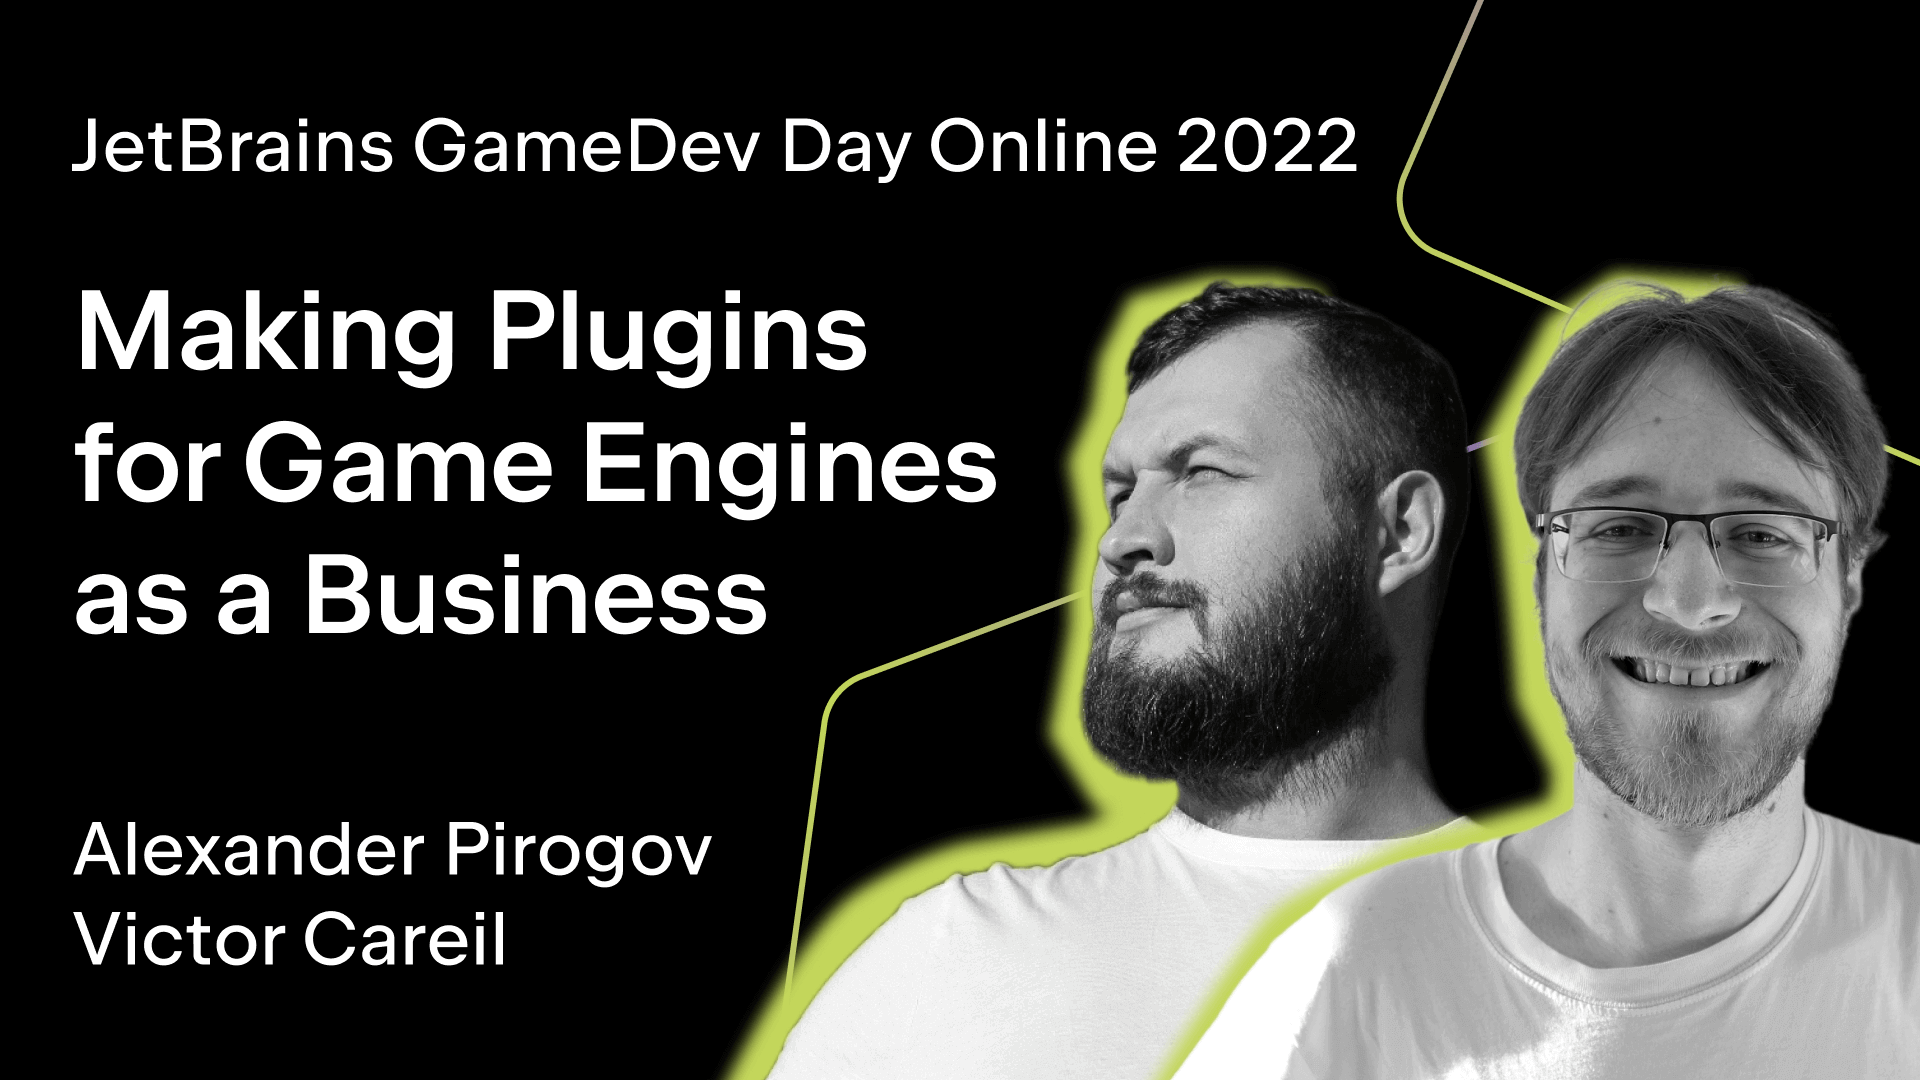 Making Plugins for Game Engines as a Business